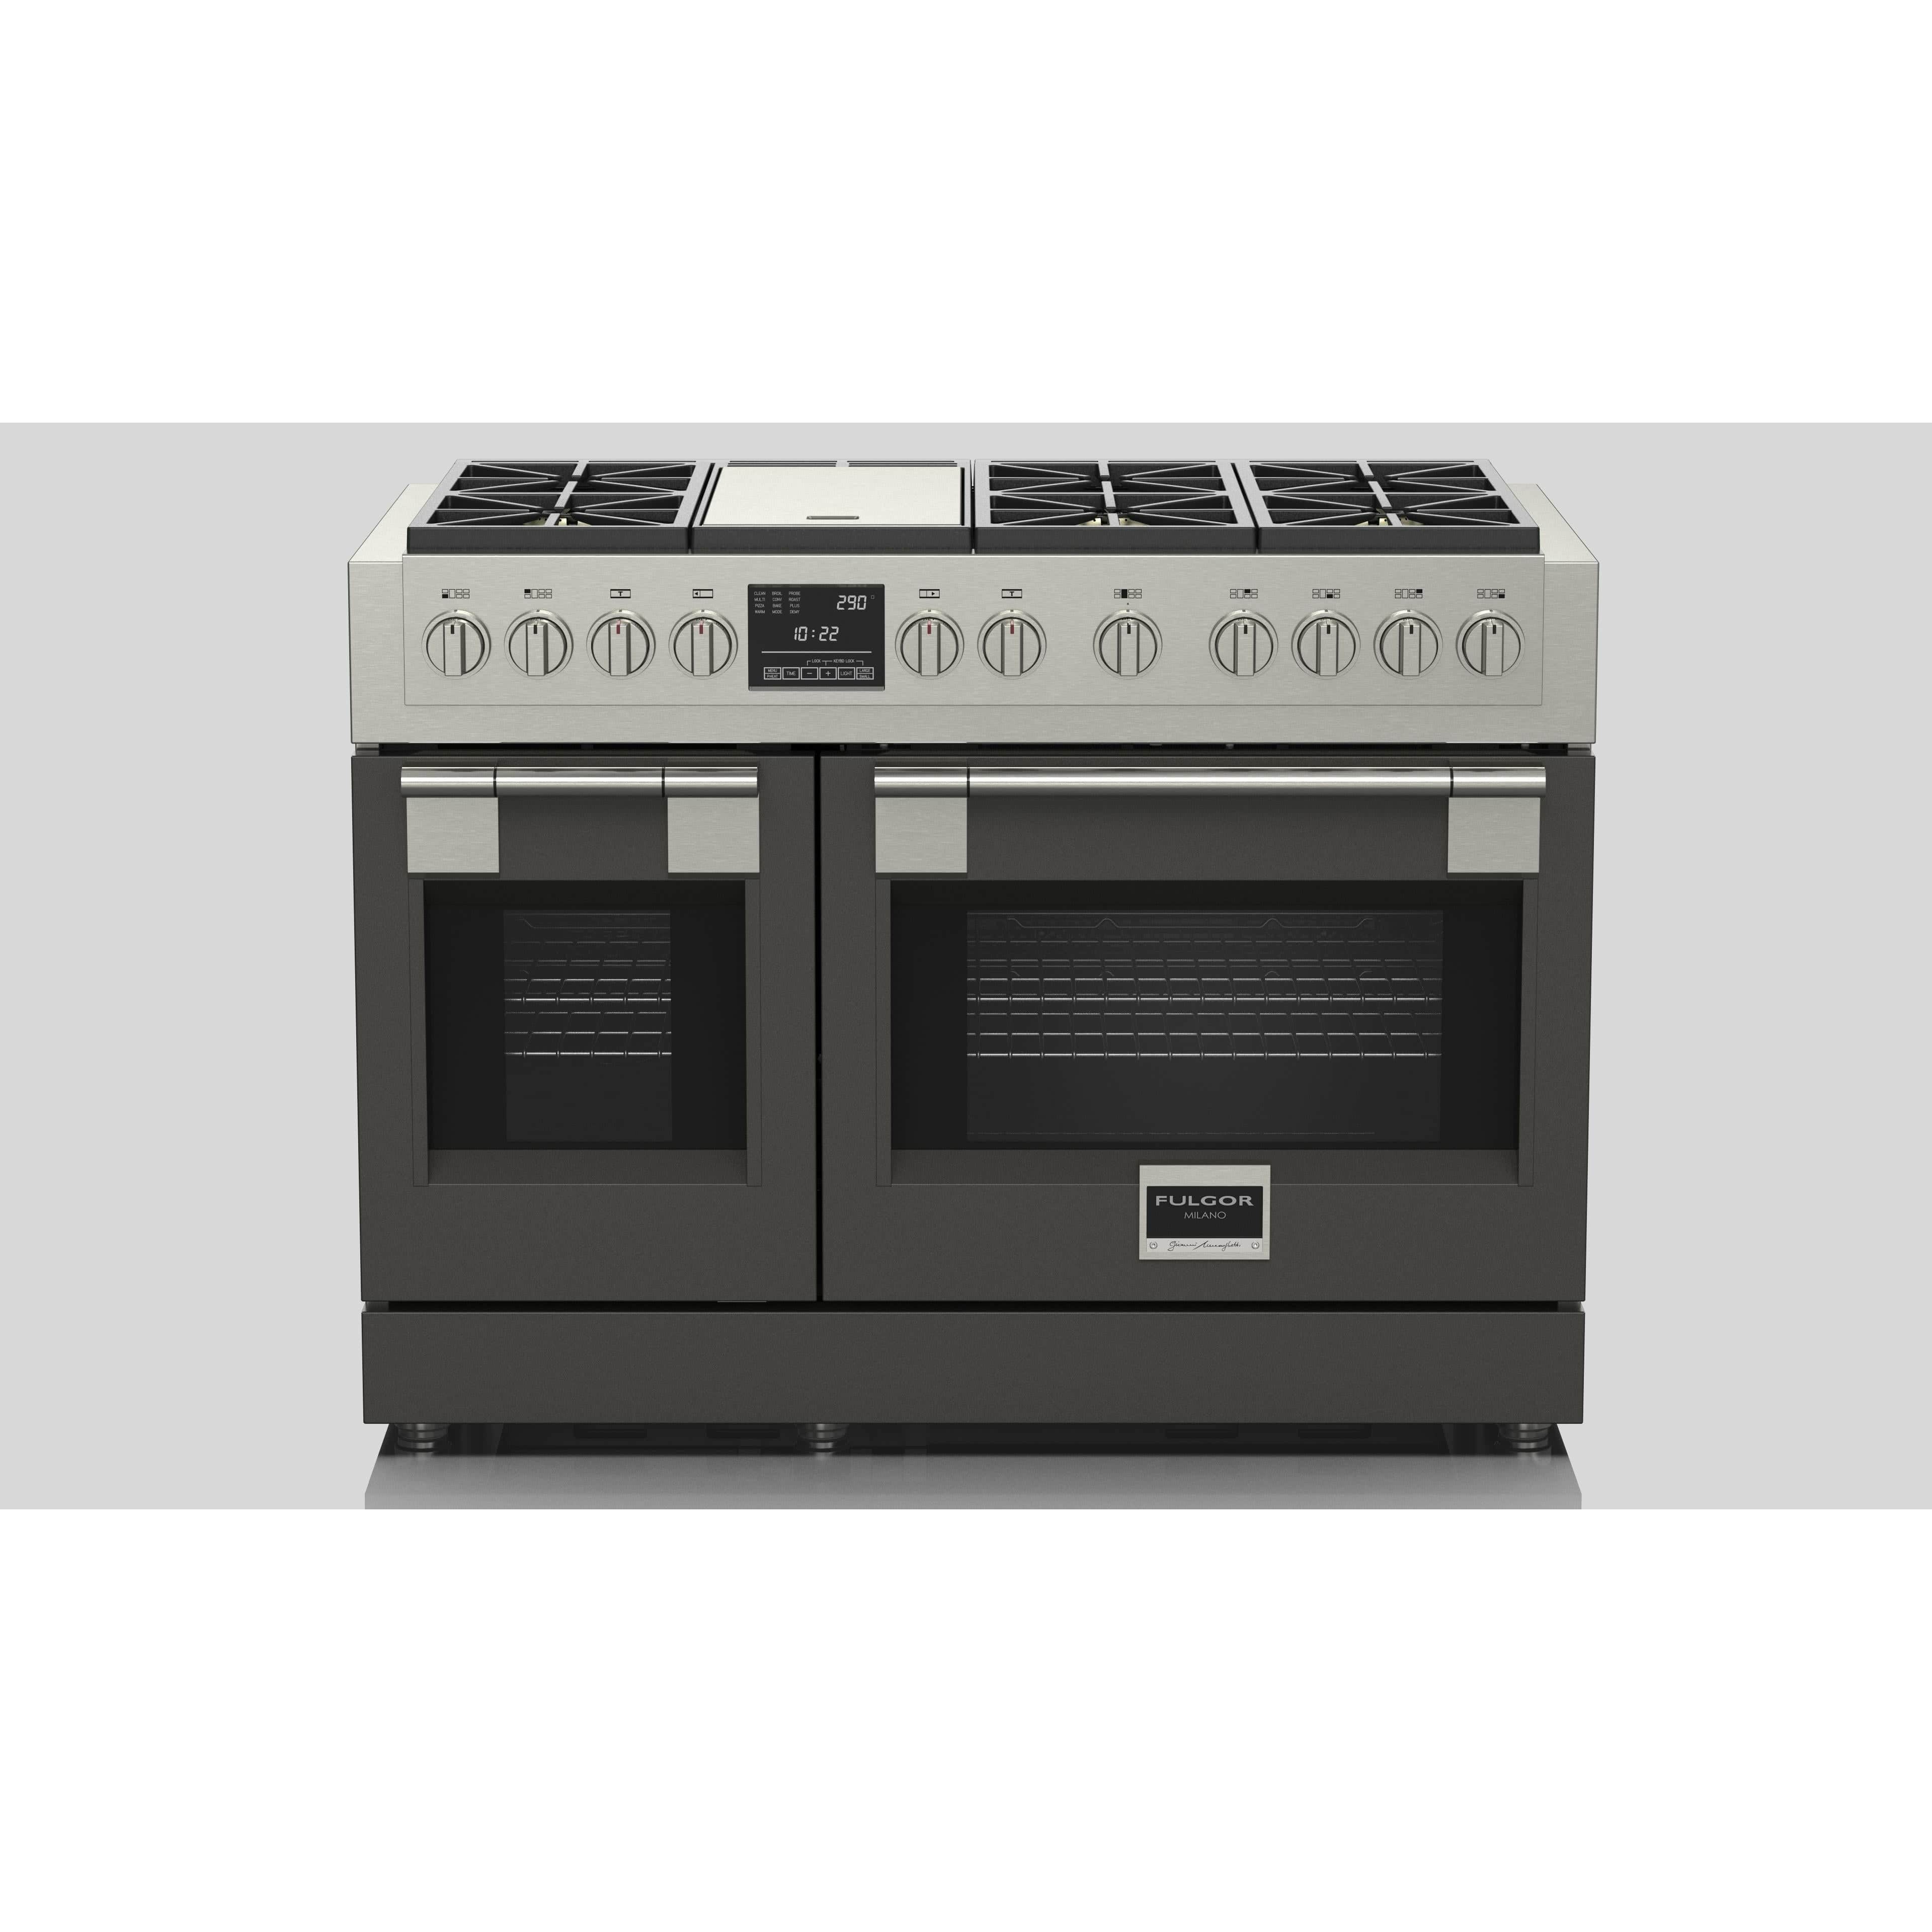 Fulgor Milano 48" Dual Fuel Professional Range with 6 Dual Flame Burners,  6.5 Cu. Ft. Total Capacity Stainless Steel - F6PDF486GS1 Ranges PDRKIT48MG Luxury Appliances Direct